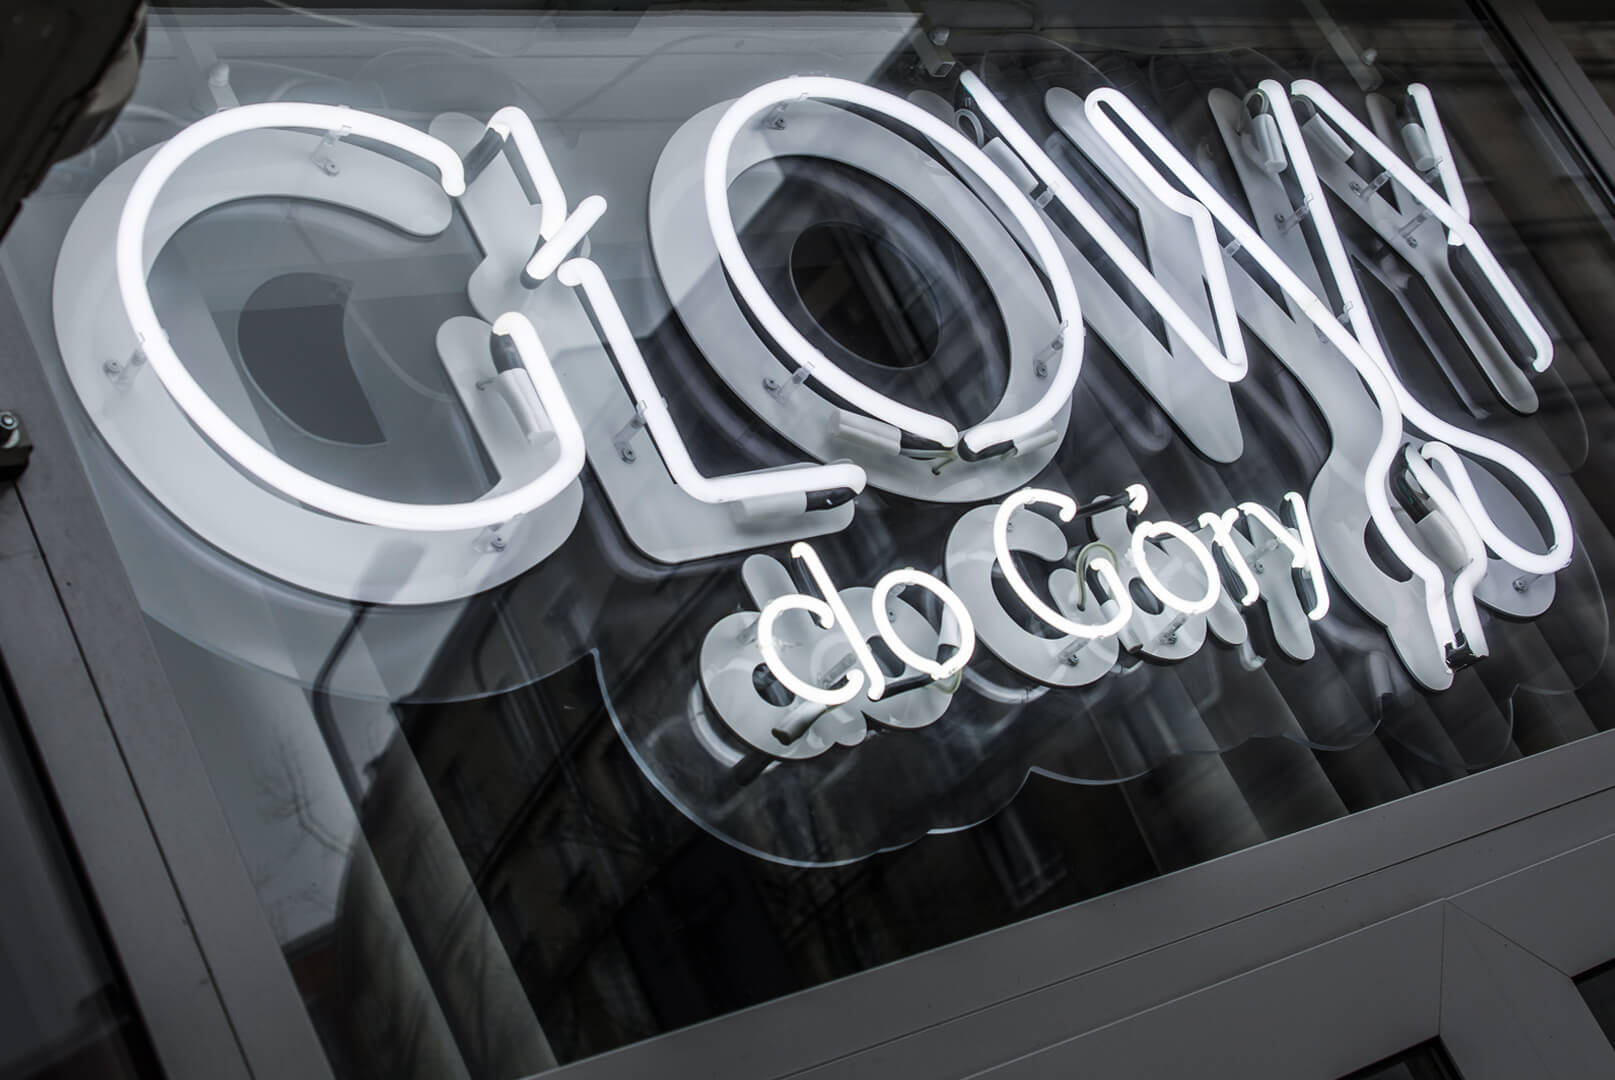 Heads Up  - neon-heads-up-up-neon-on-plexi-neon-over-the-entrance-neon-behind-the-glass-inscription-neon-inside-logo-neon-letters-neon-scissors-salon-hairdresser-warszawa-hairdresser